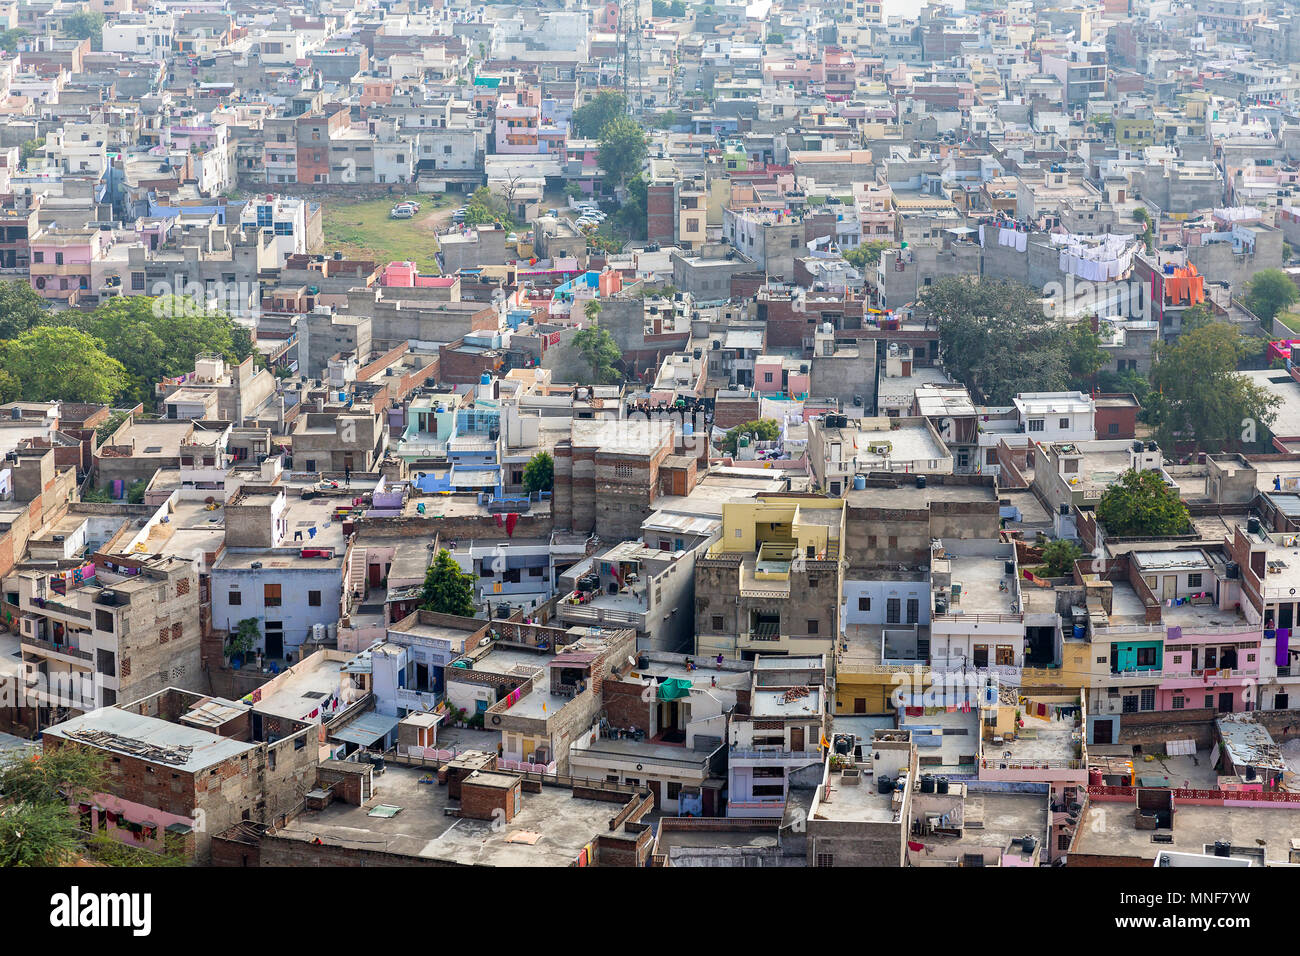 City view from Nahargarh Fort, Jaipur, Rajasthan, India Stock Photo